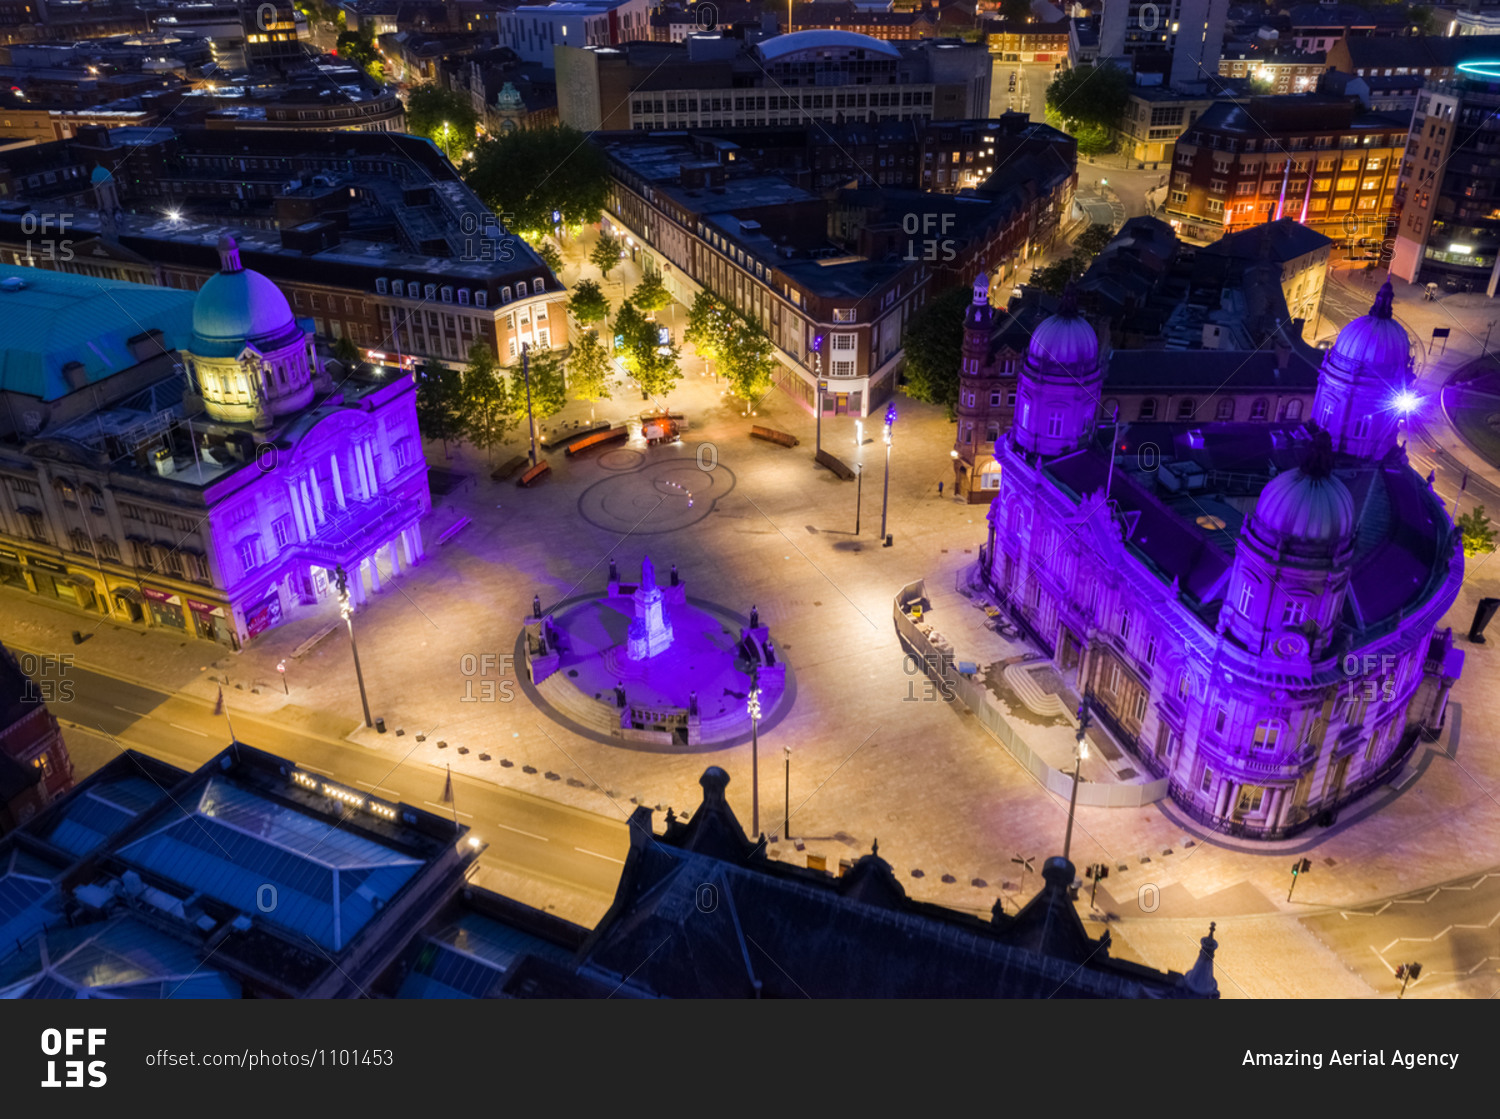 Aerial view of Queen Victoria square with purple light at night in Hull city center, United Kingdom.